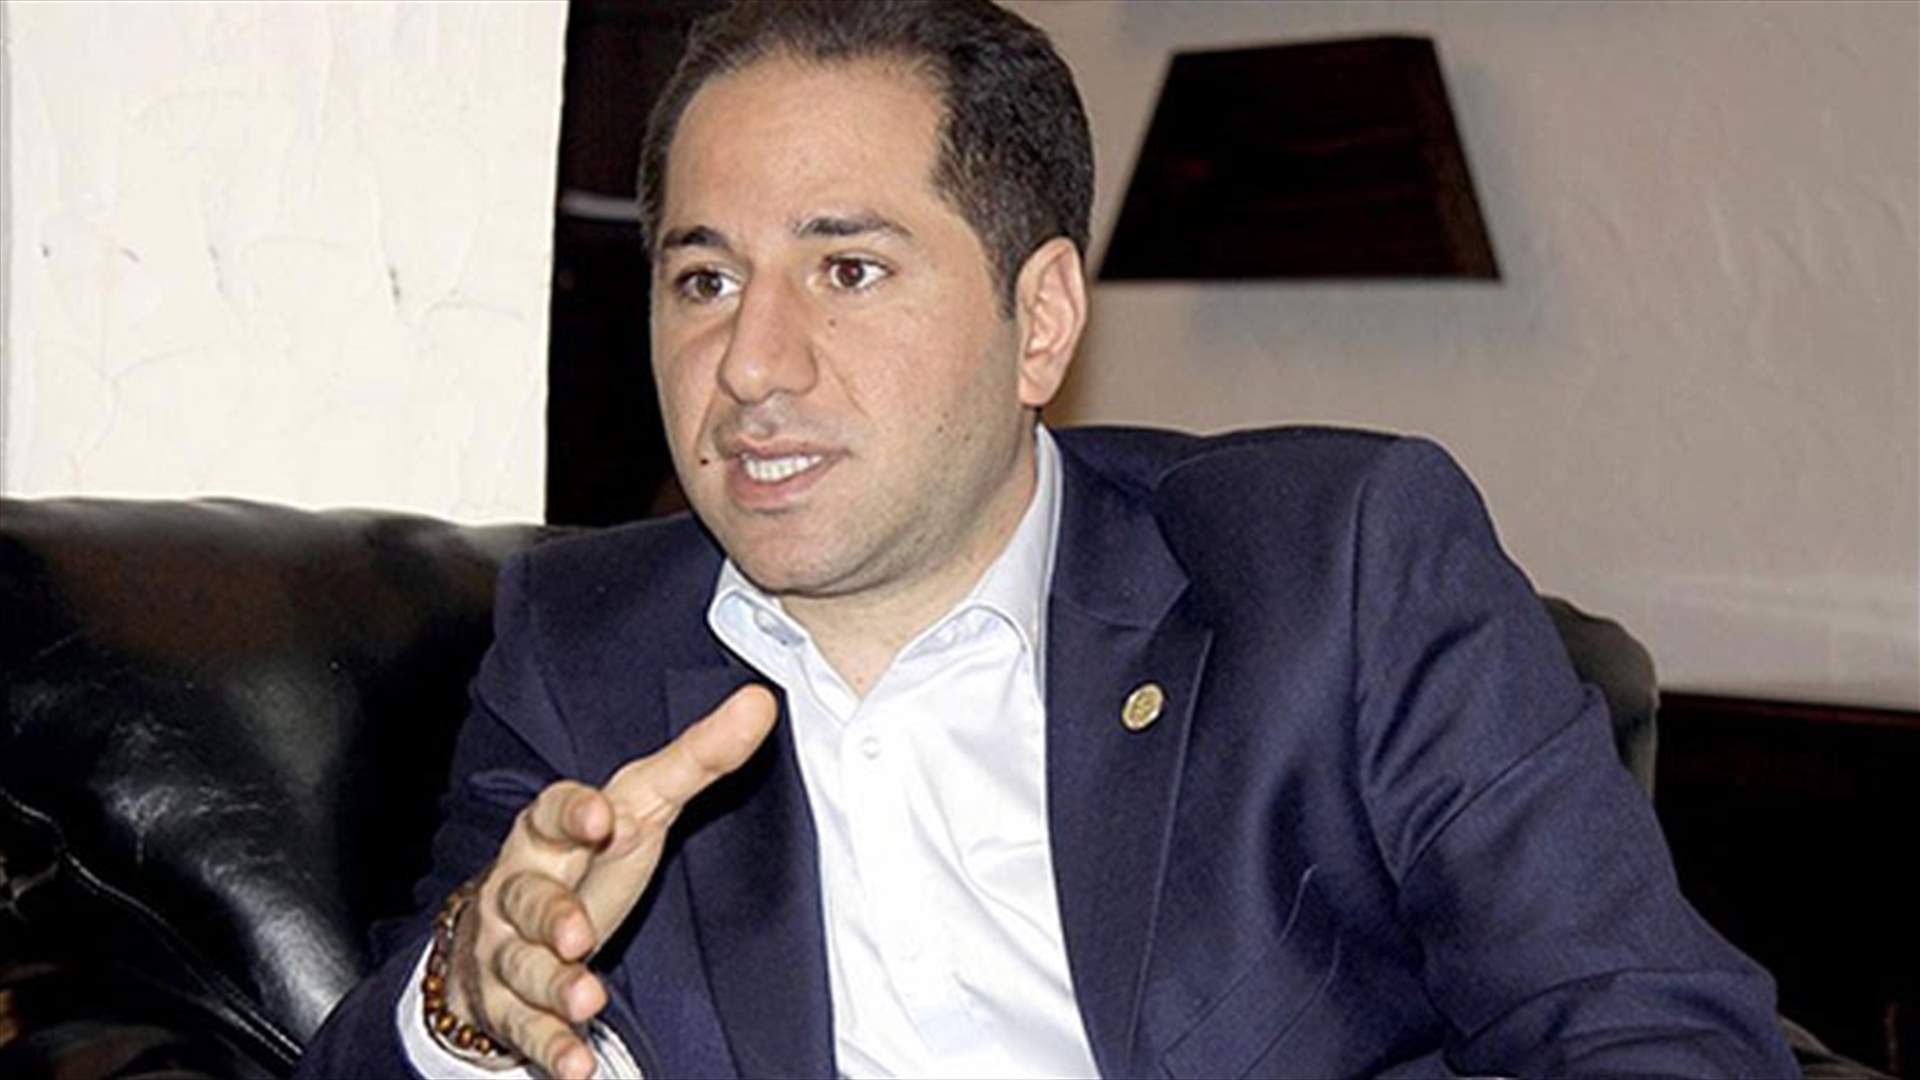 Kataeb chief says party will vote according to convictions